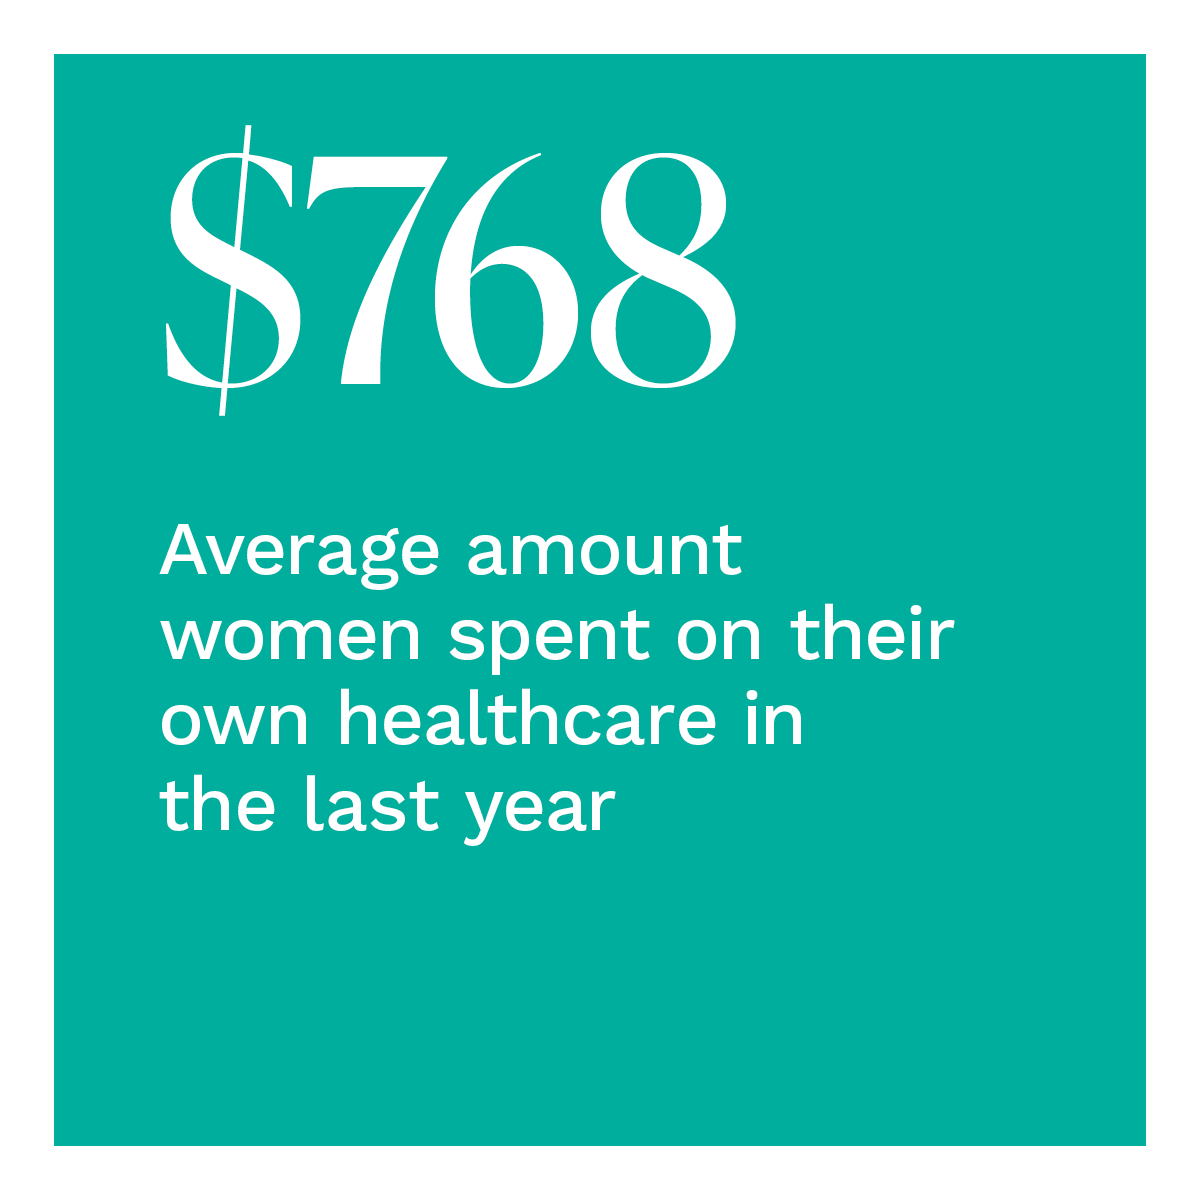 $768: Average amount women spent on their own healthcare in the last year